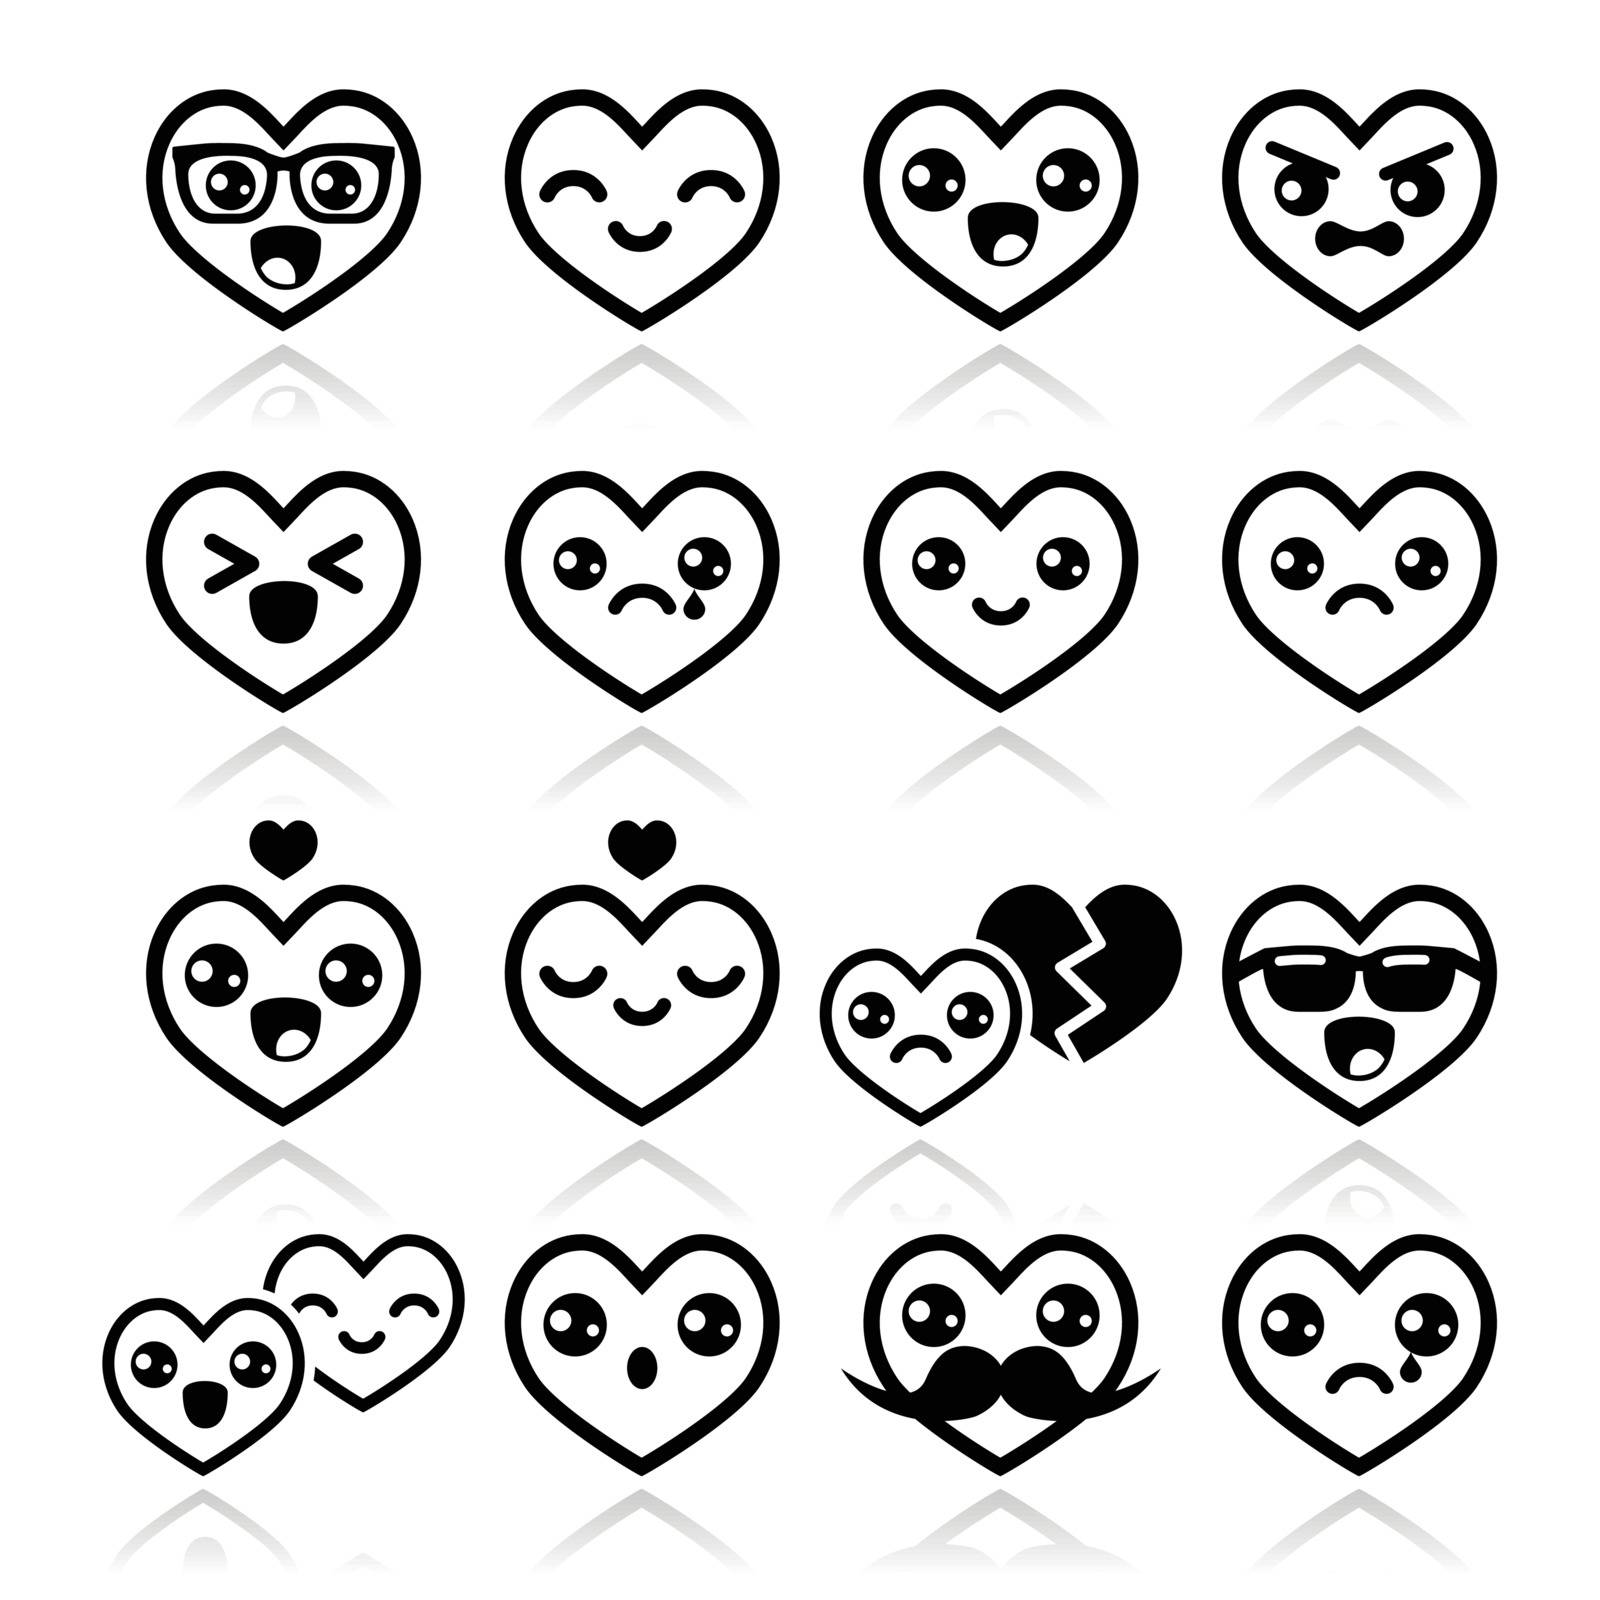 Kawaii hearts, Valentine's Day cute vector icons set by RedKoala